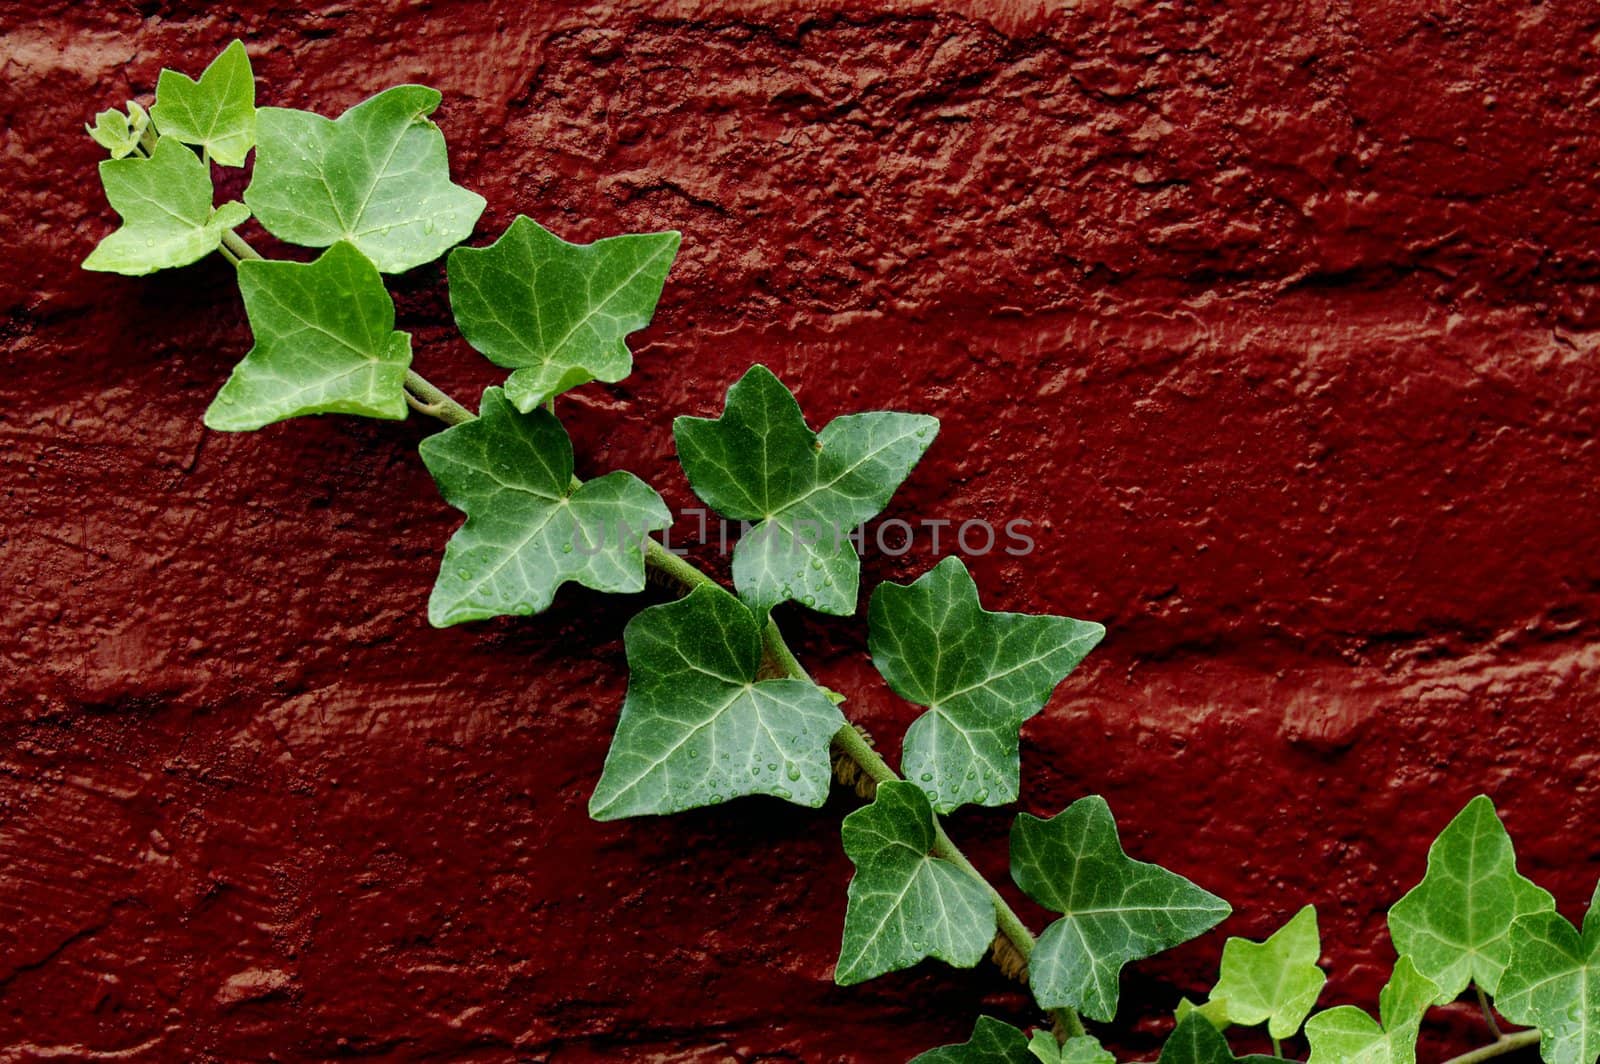 Green ivy growing on a red brick wall.